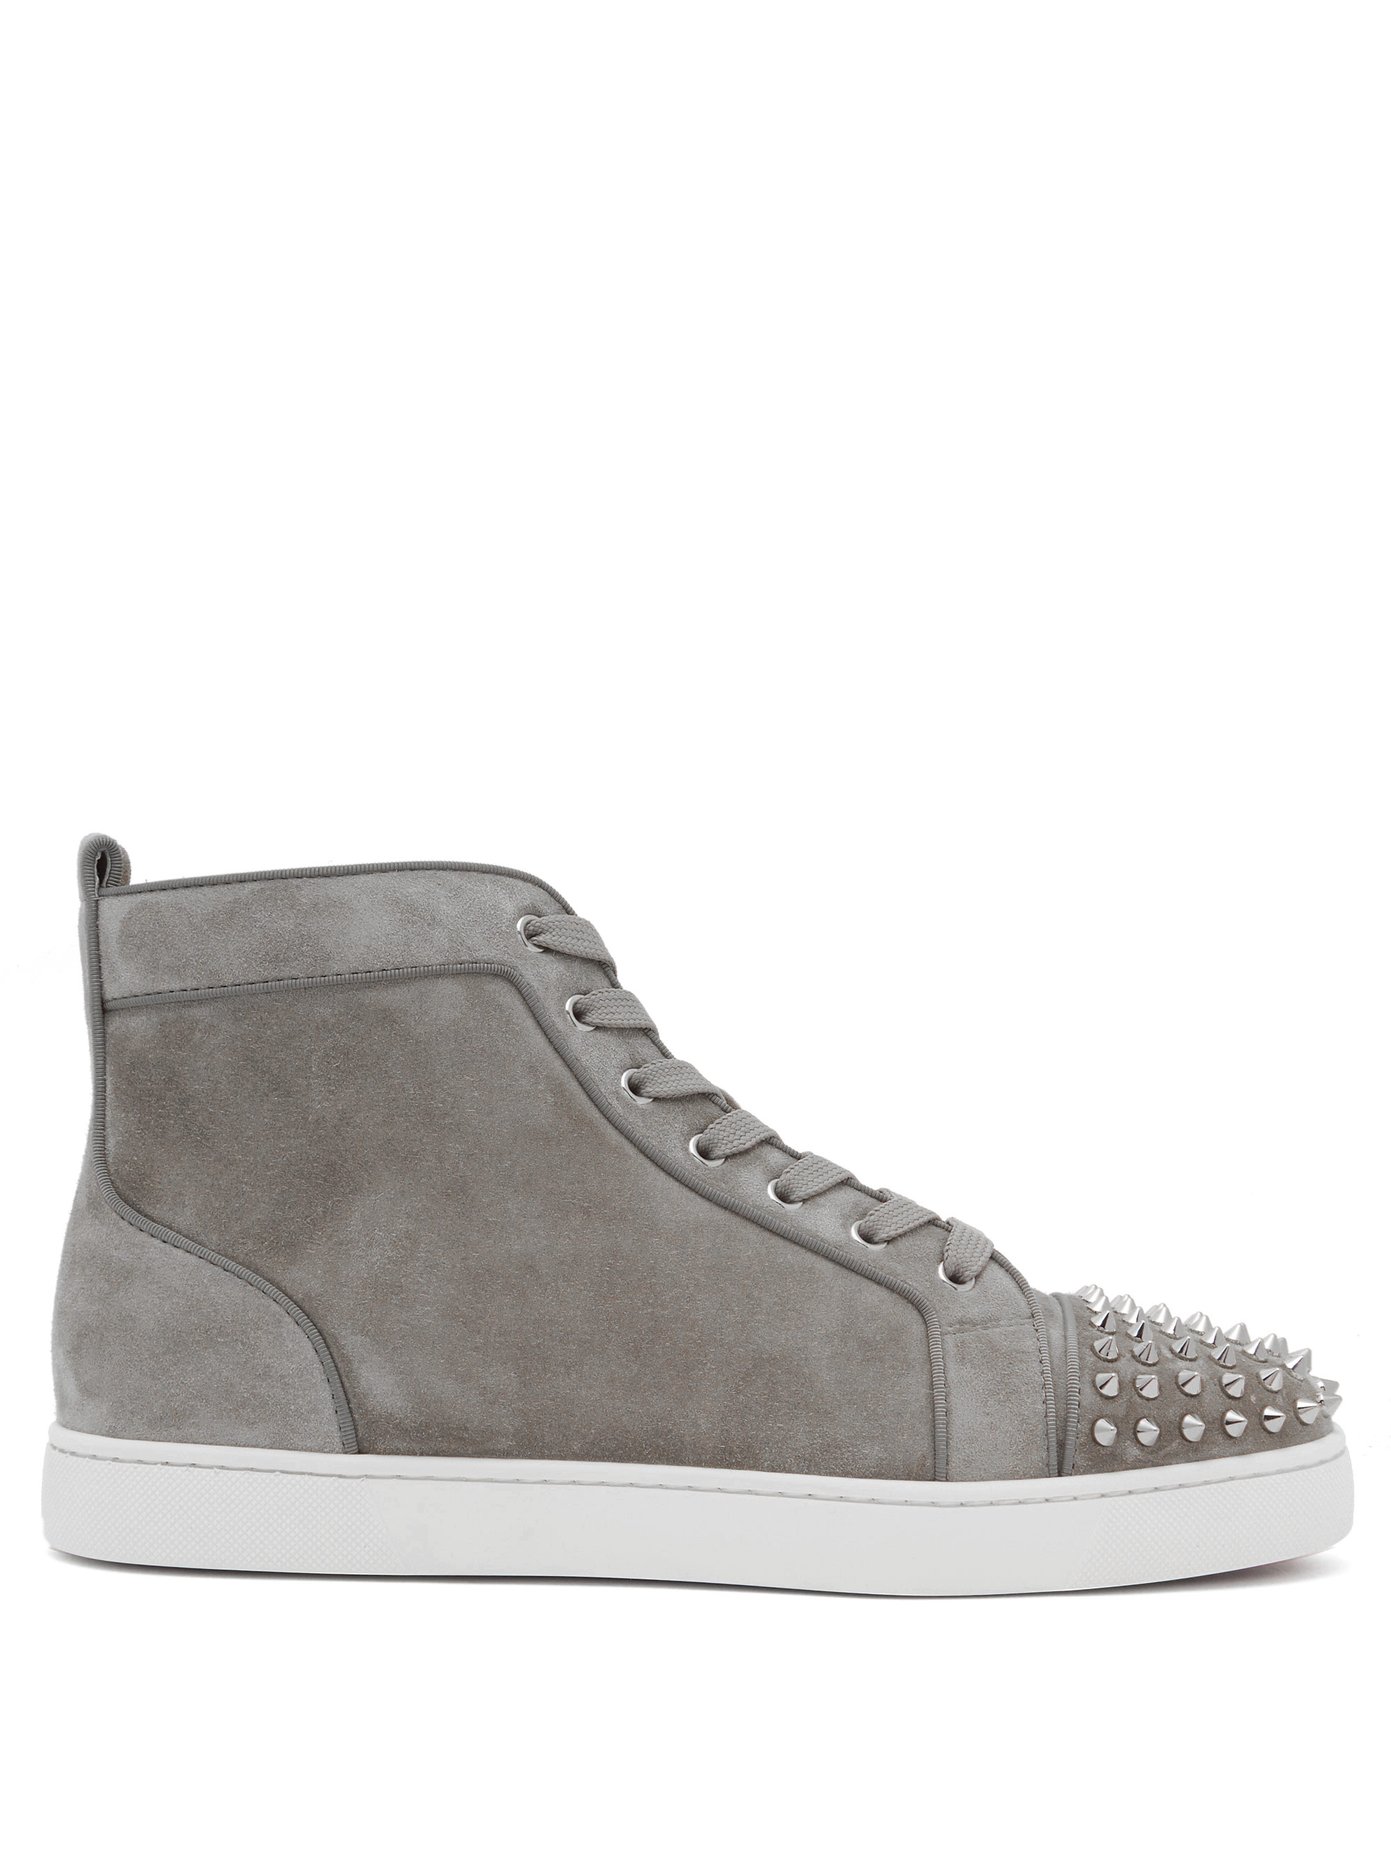 grey suede louboutin trainers